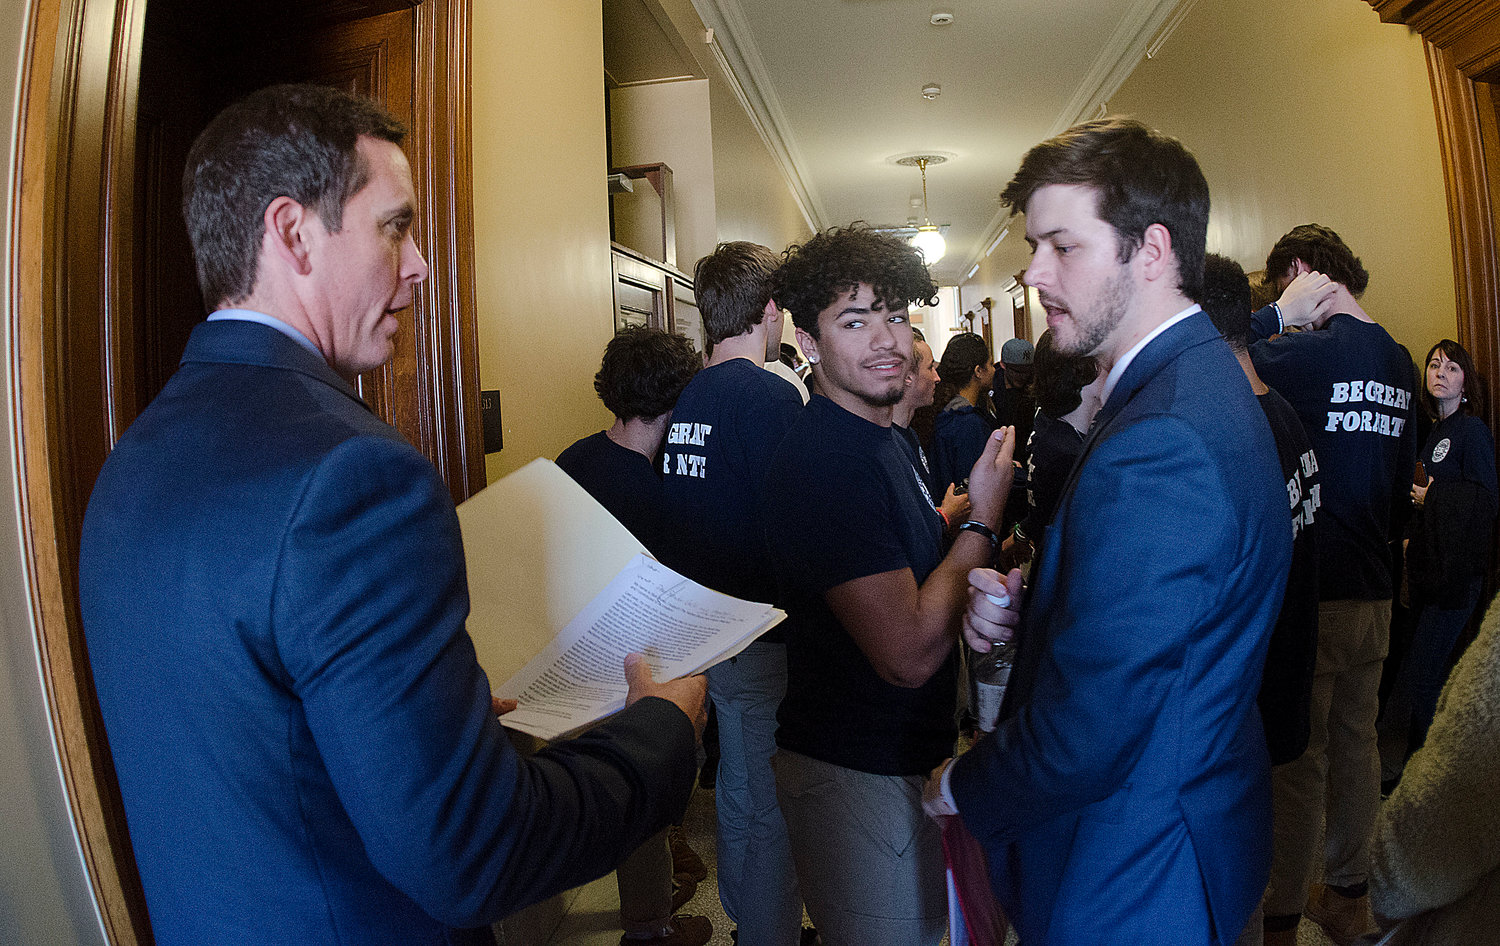 Rick Bruno (left), father of the late Nathan Bruno, speaks with Steven Peterson, program director of Every Student Initiative, outside a hearing room at the State House.